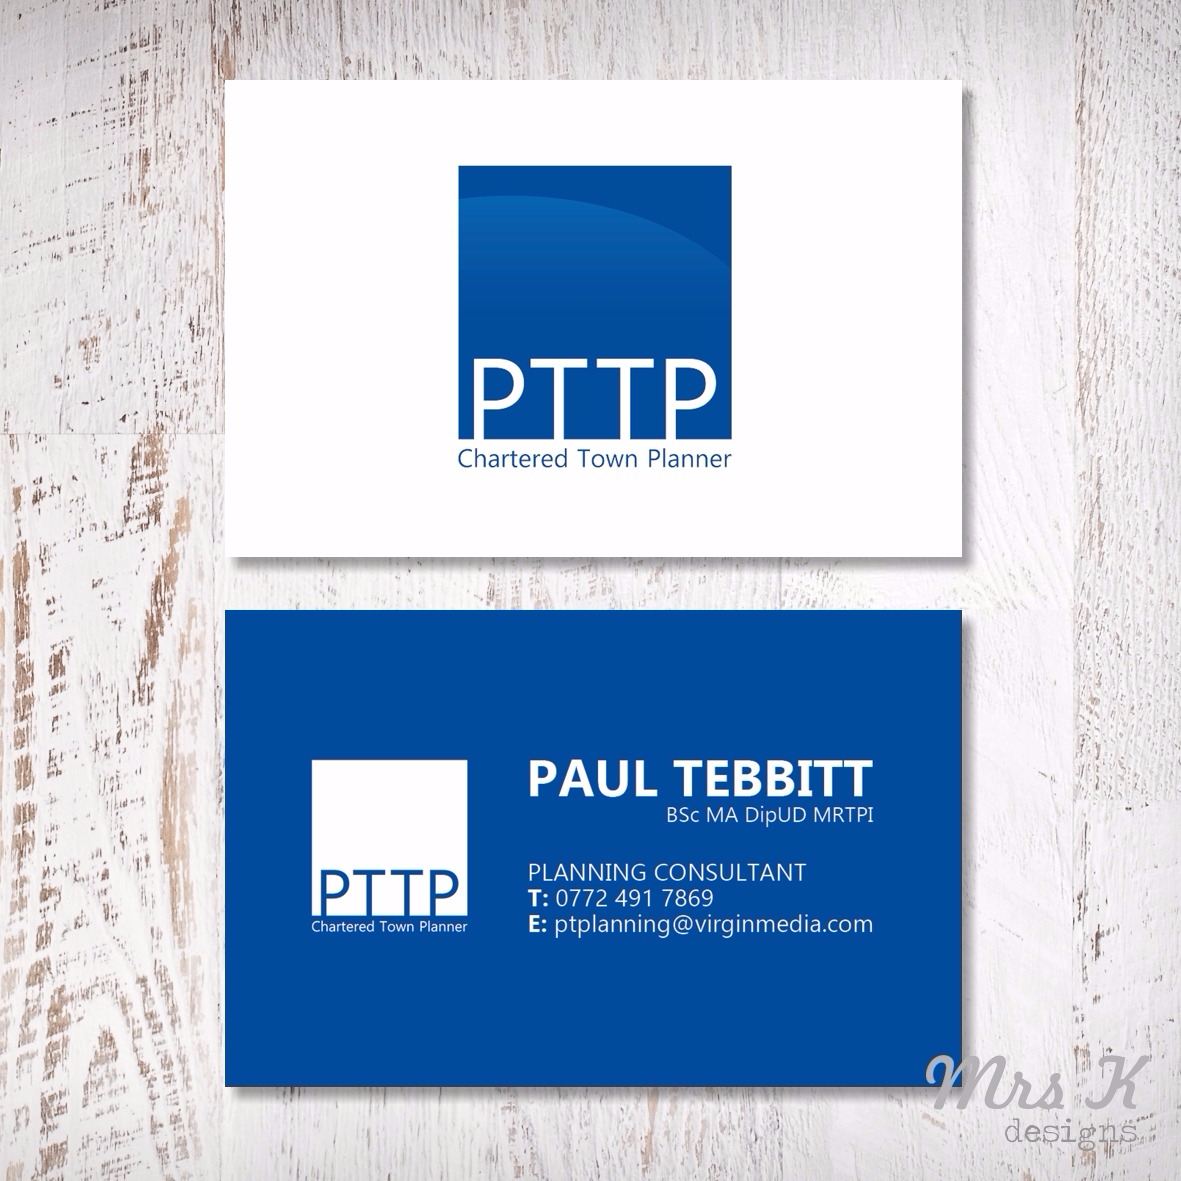 business cards - pttp